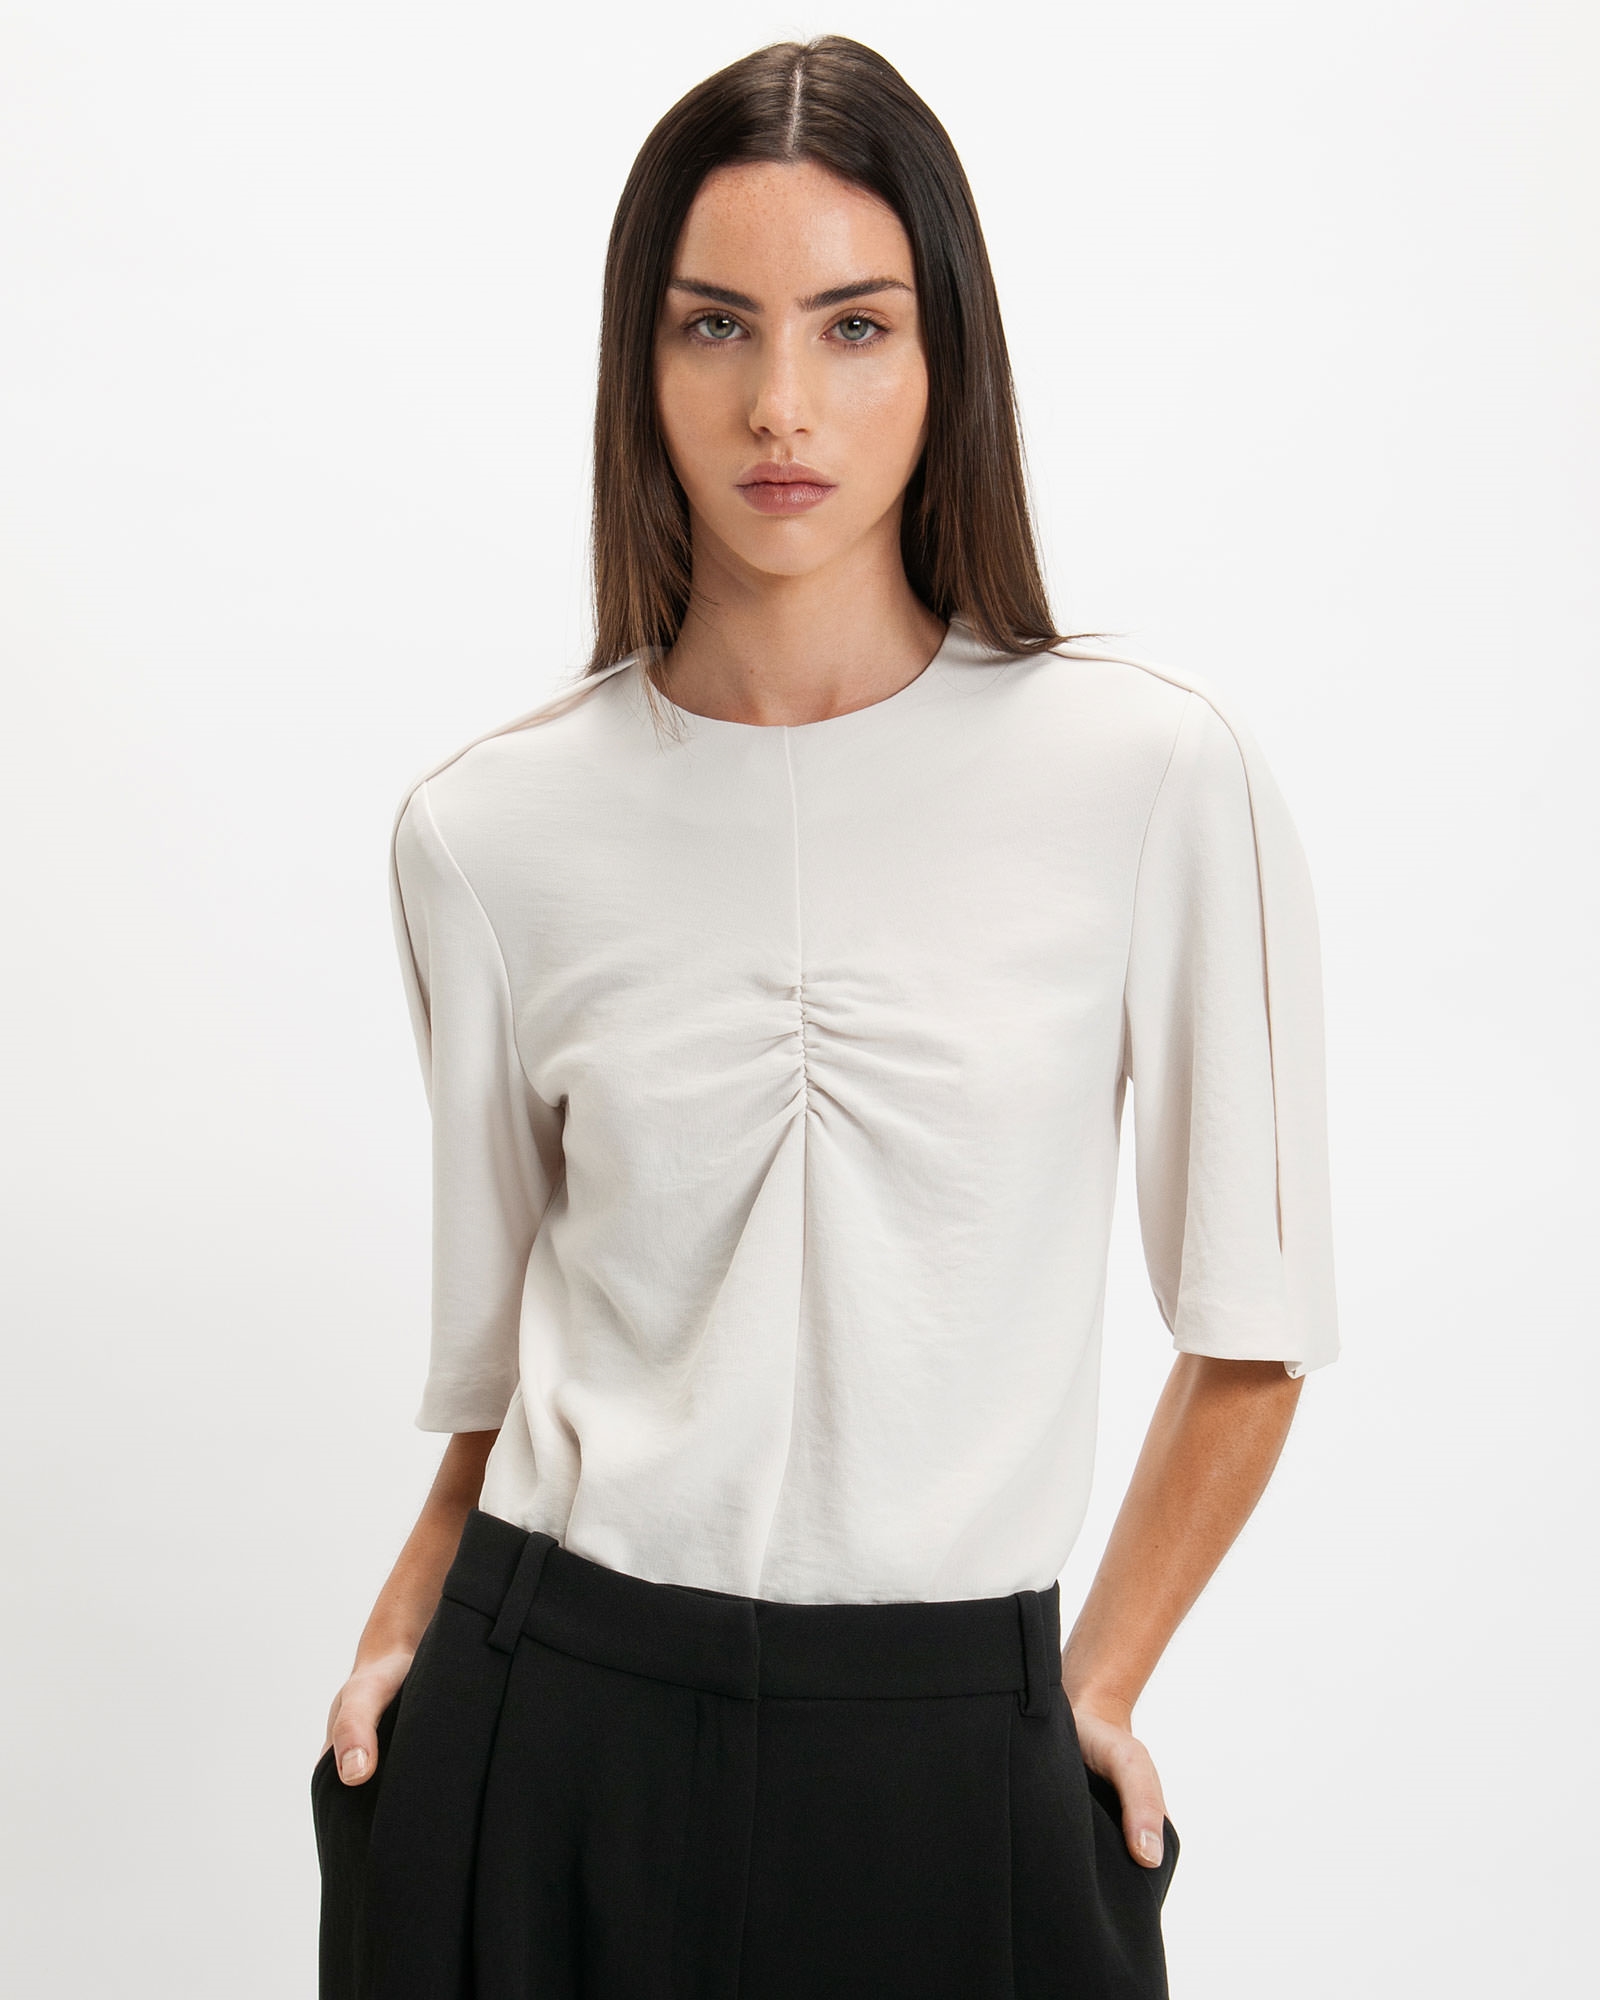 Ruched Front Top | Buy Tops and Shirts Online - Cue